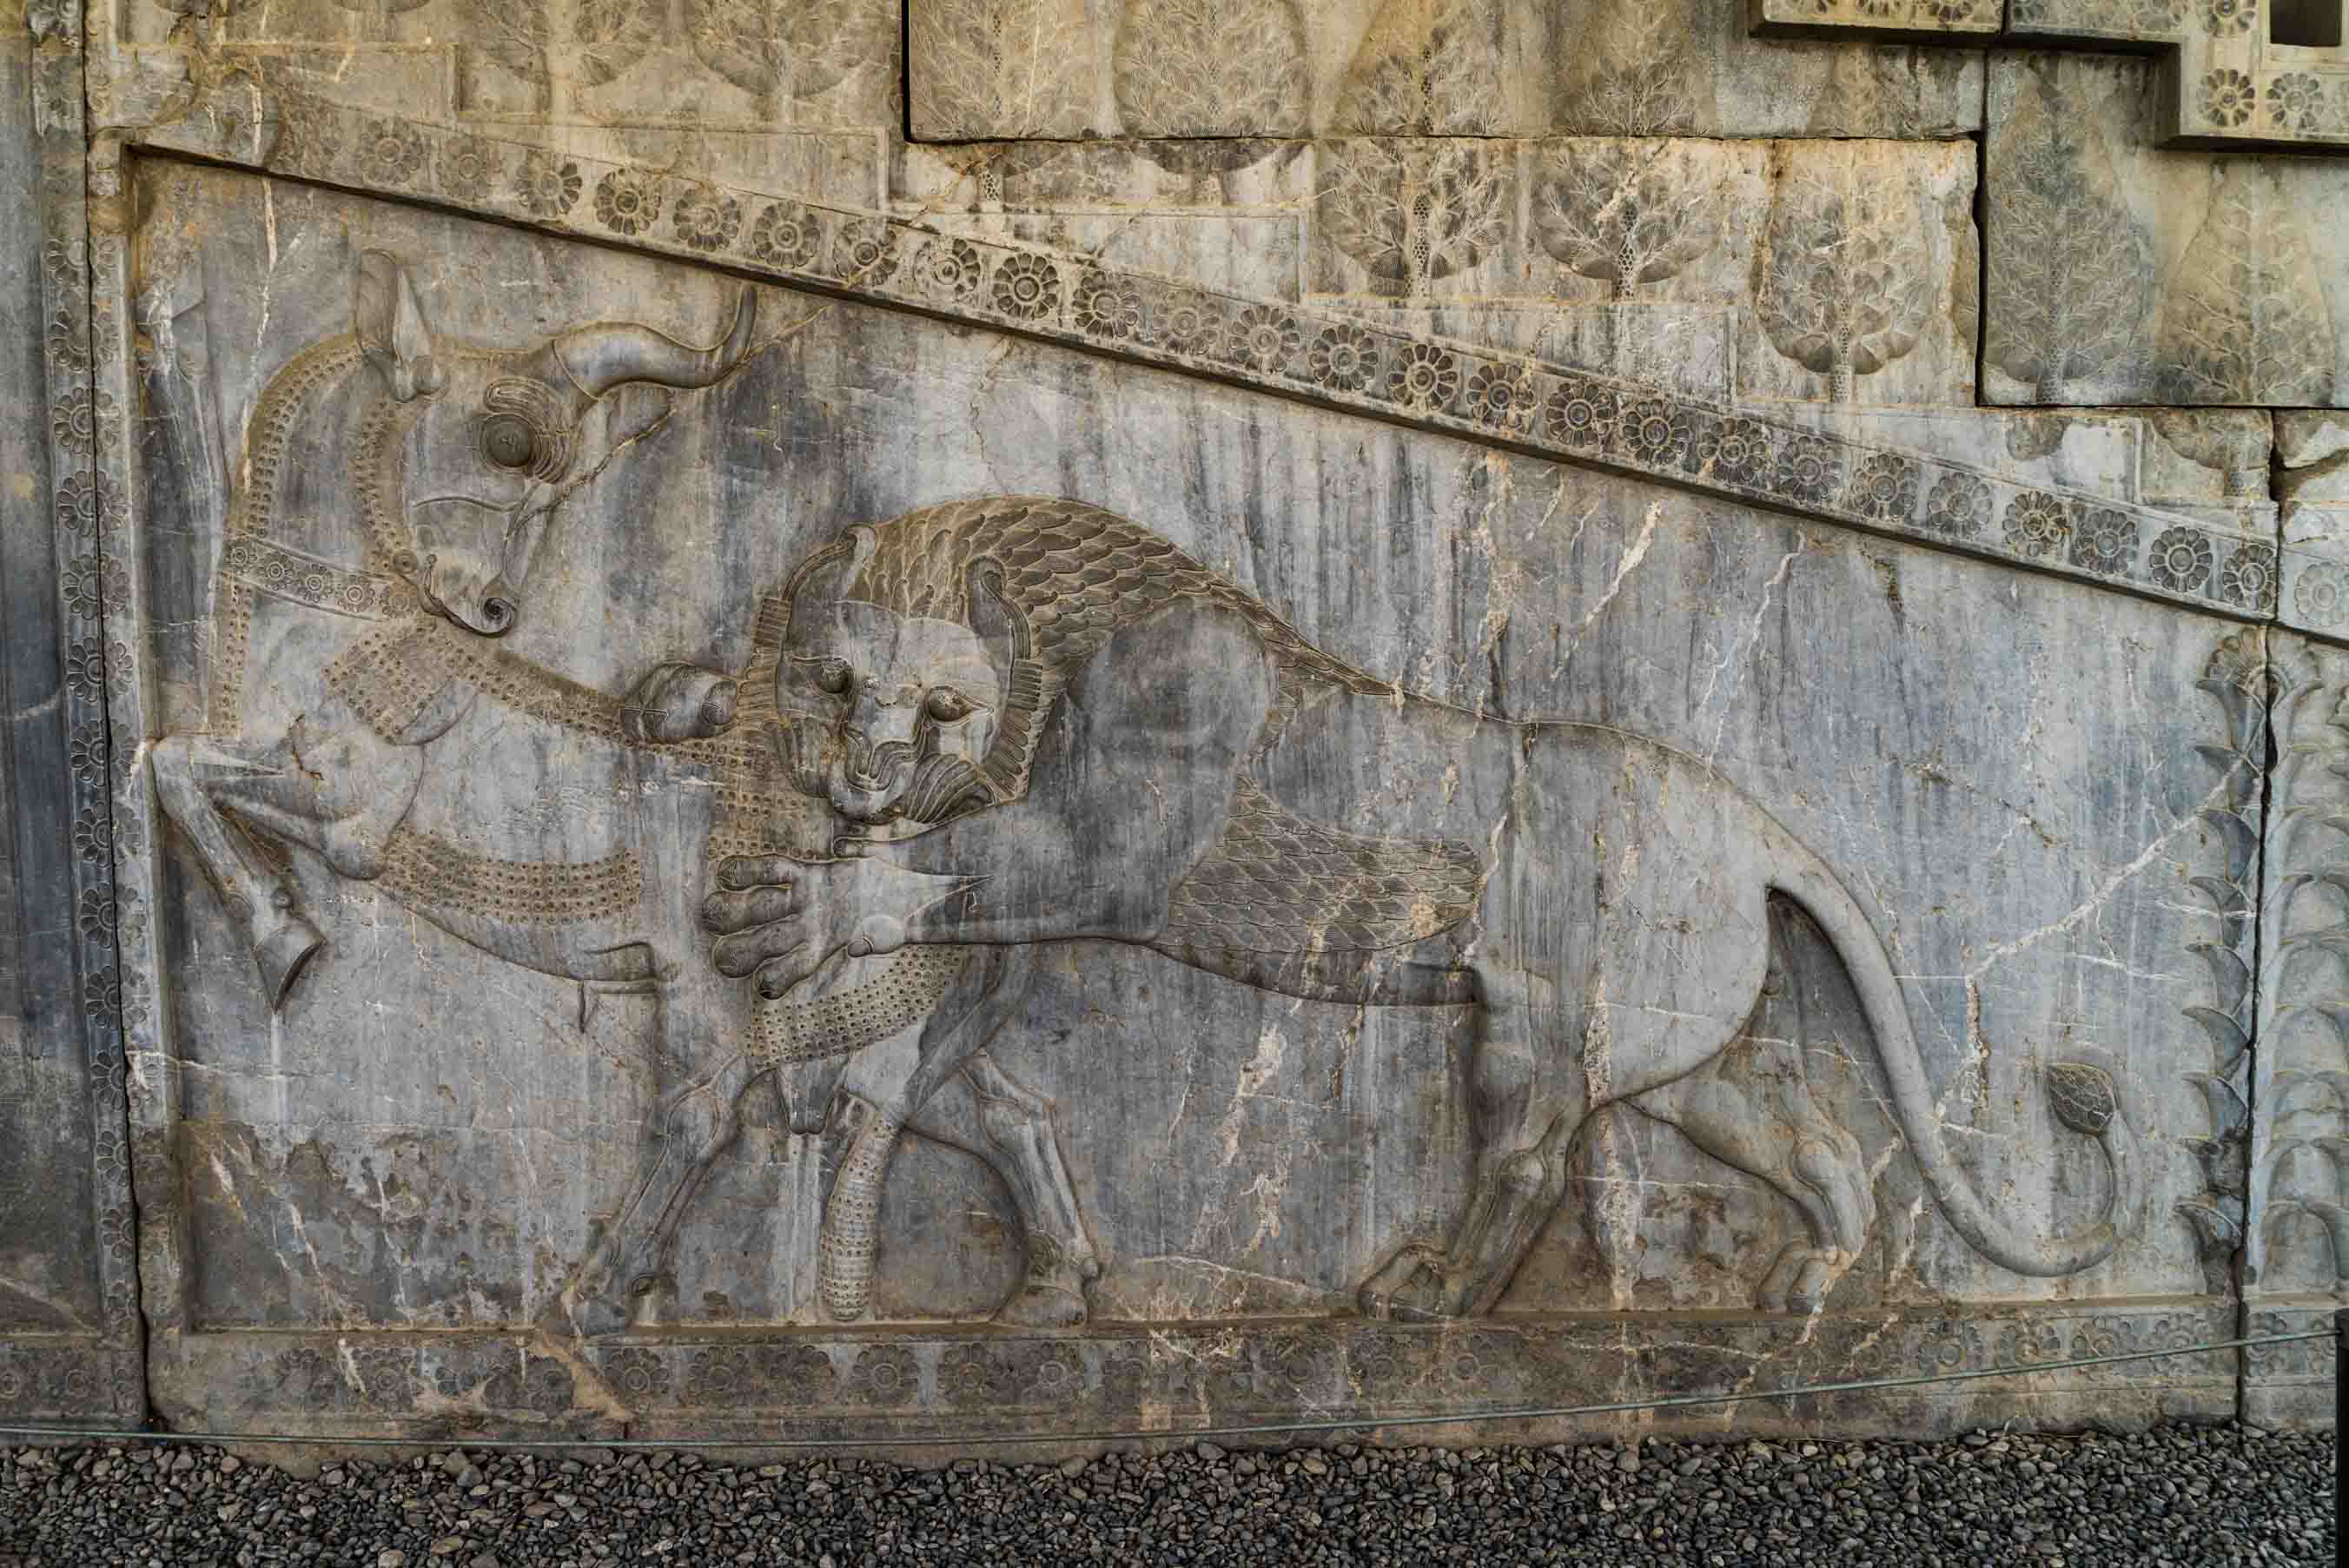 Persepolis Iran - The lion attacking the bull